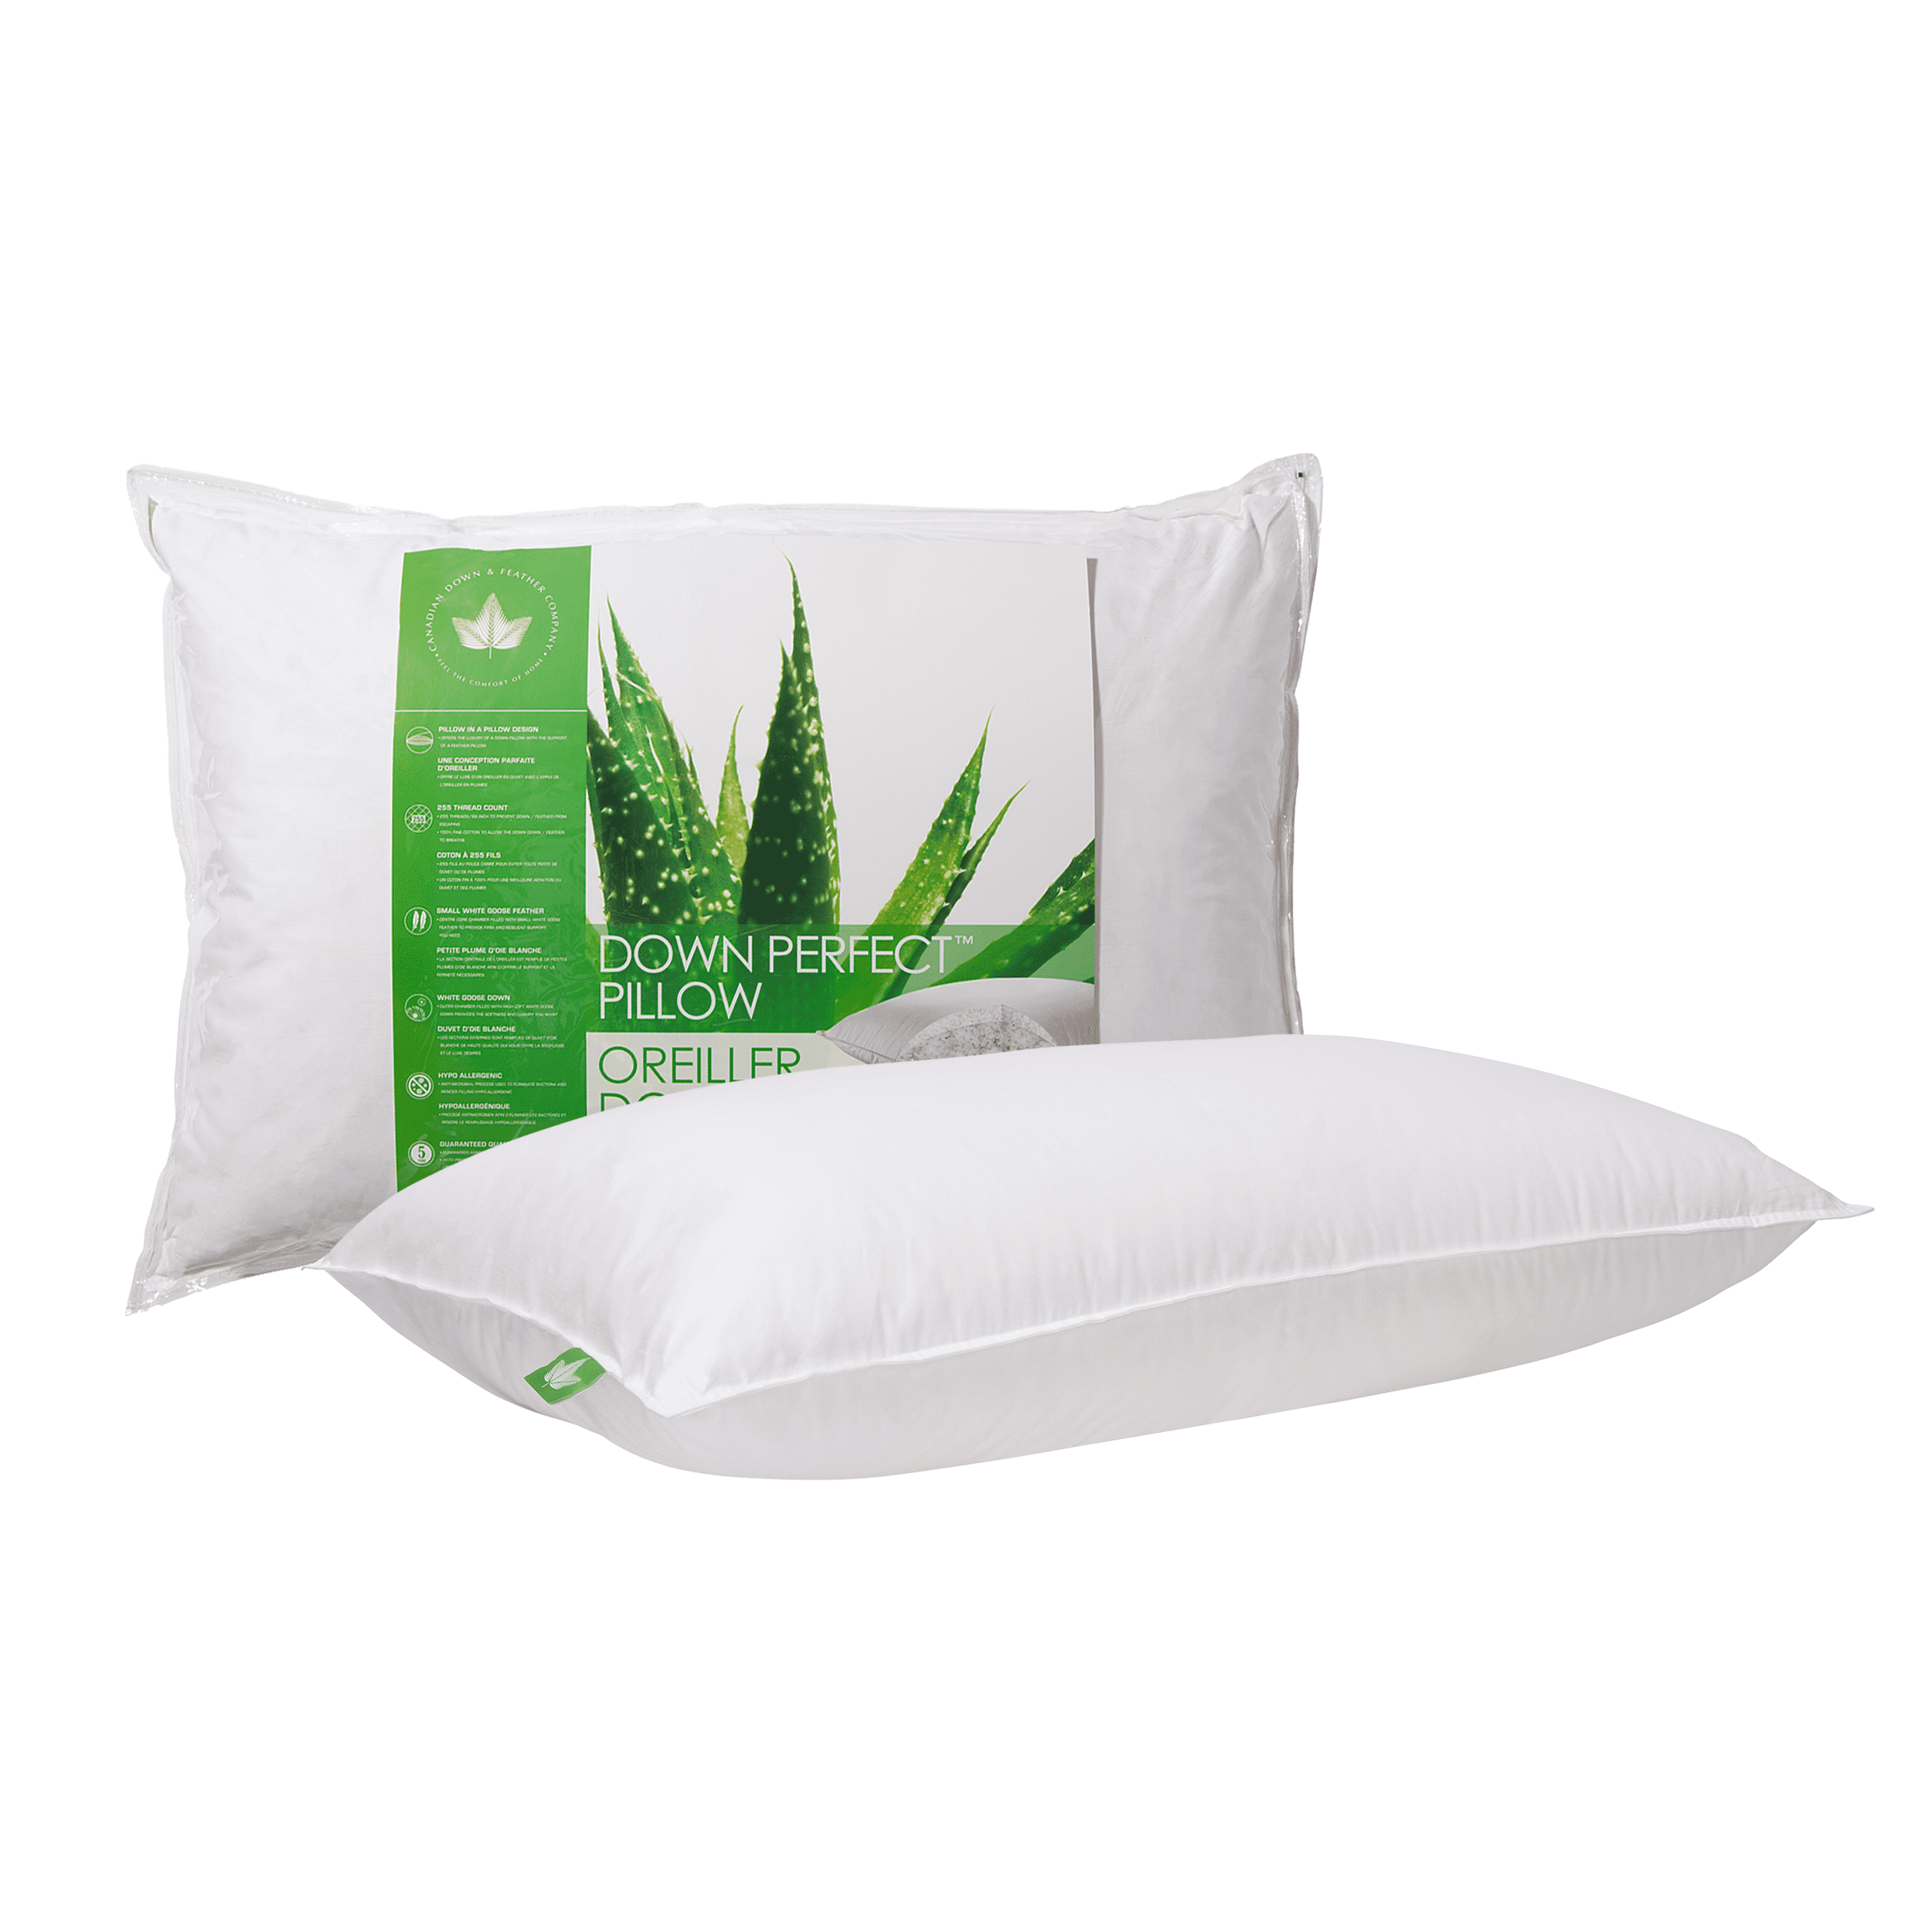 Luxurious King-Sized Down Perfect Firm Support Pillow, White